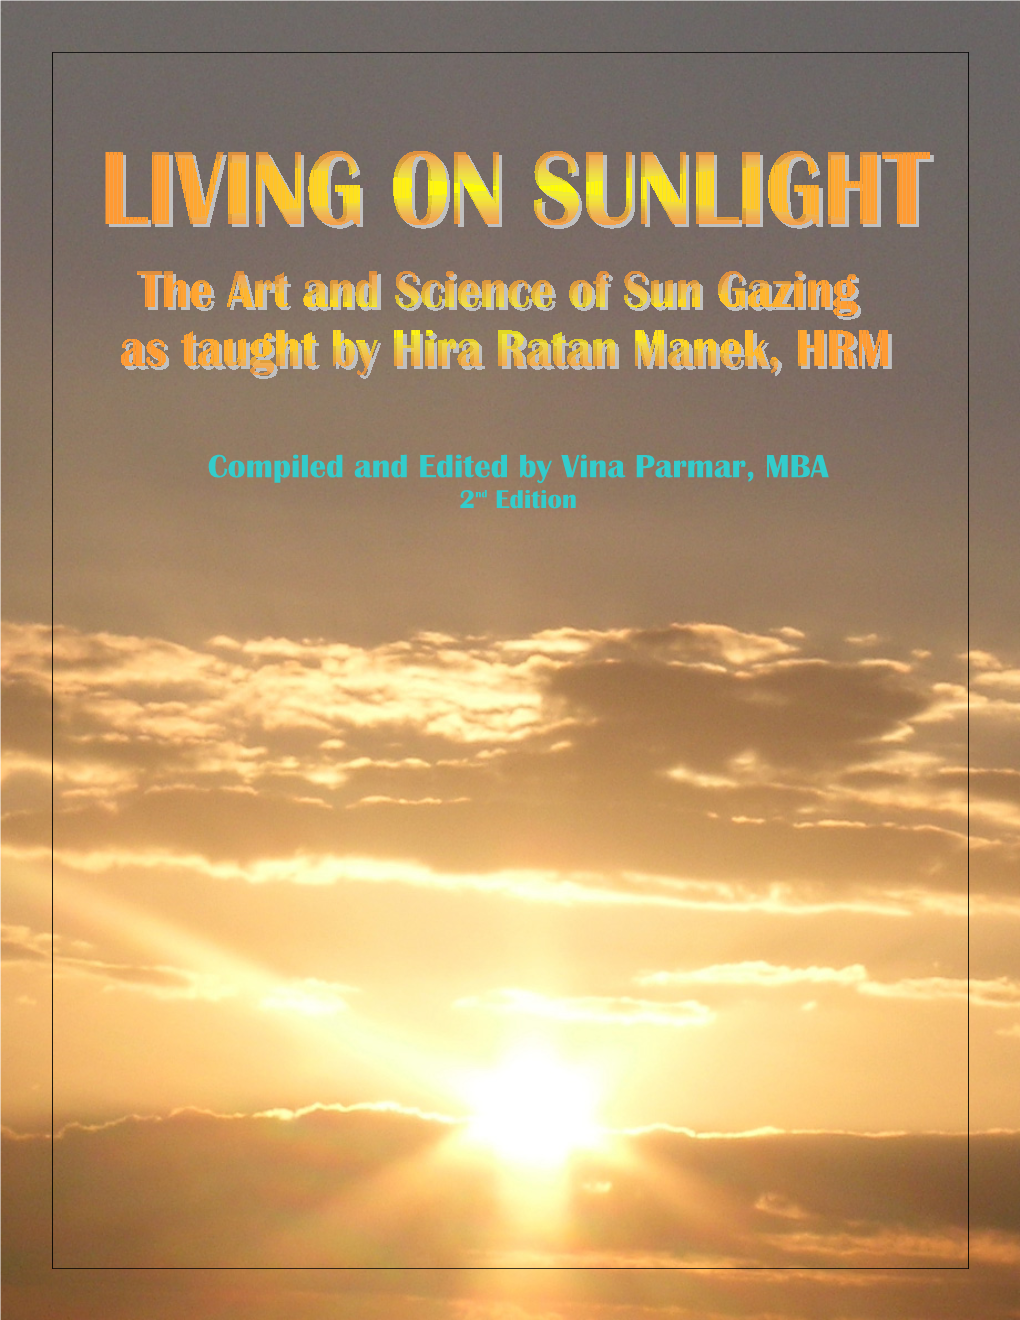 Living on Sunlight Publishing Copyright © 2004 All Rights Reserved